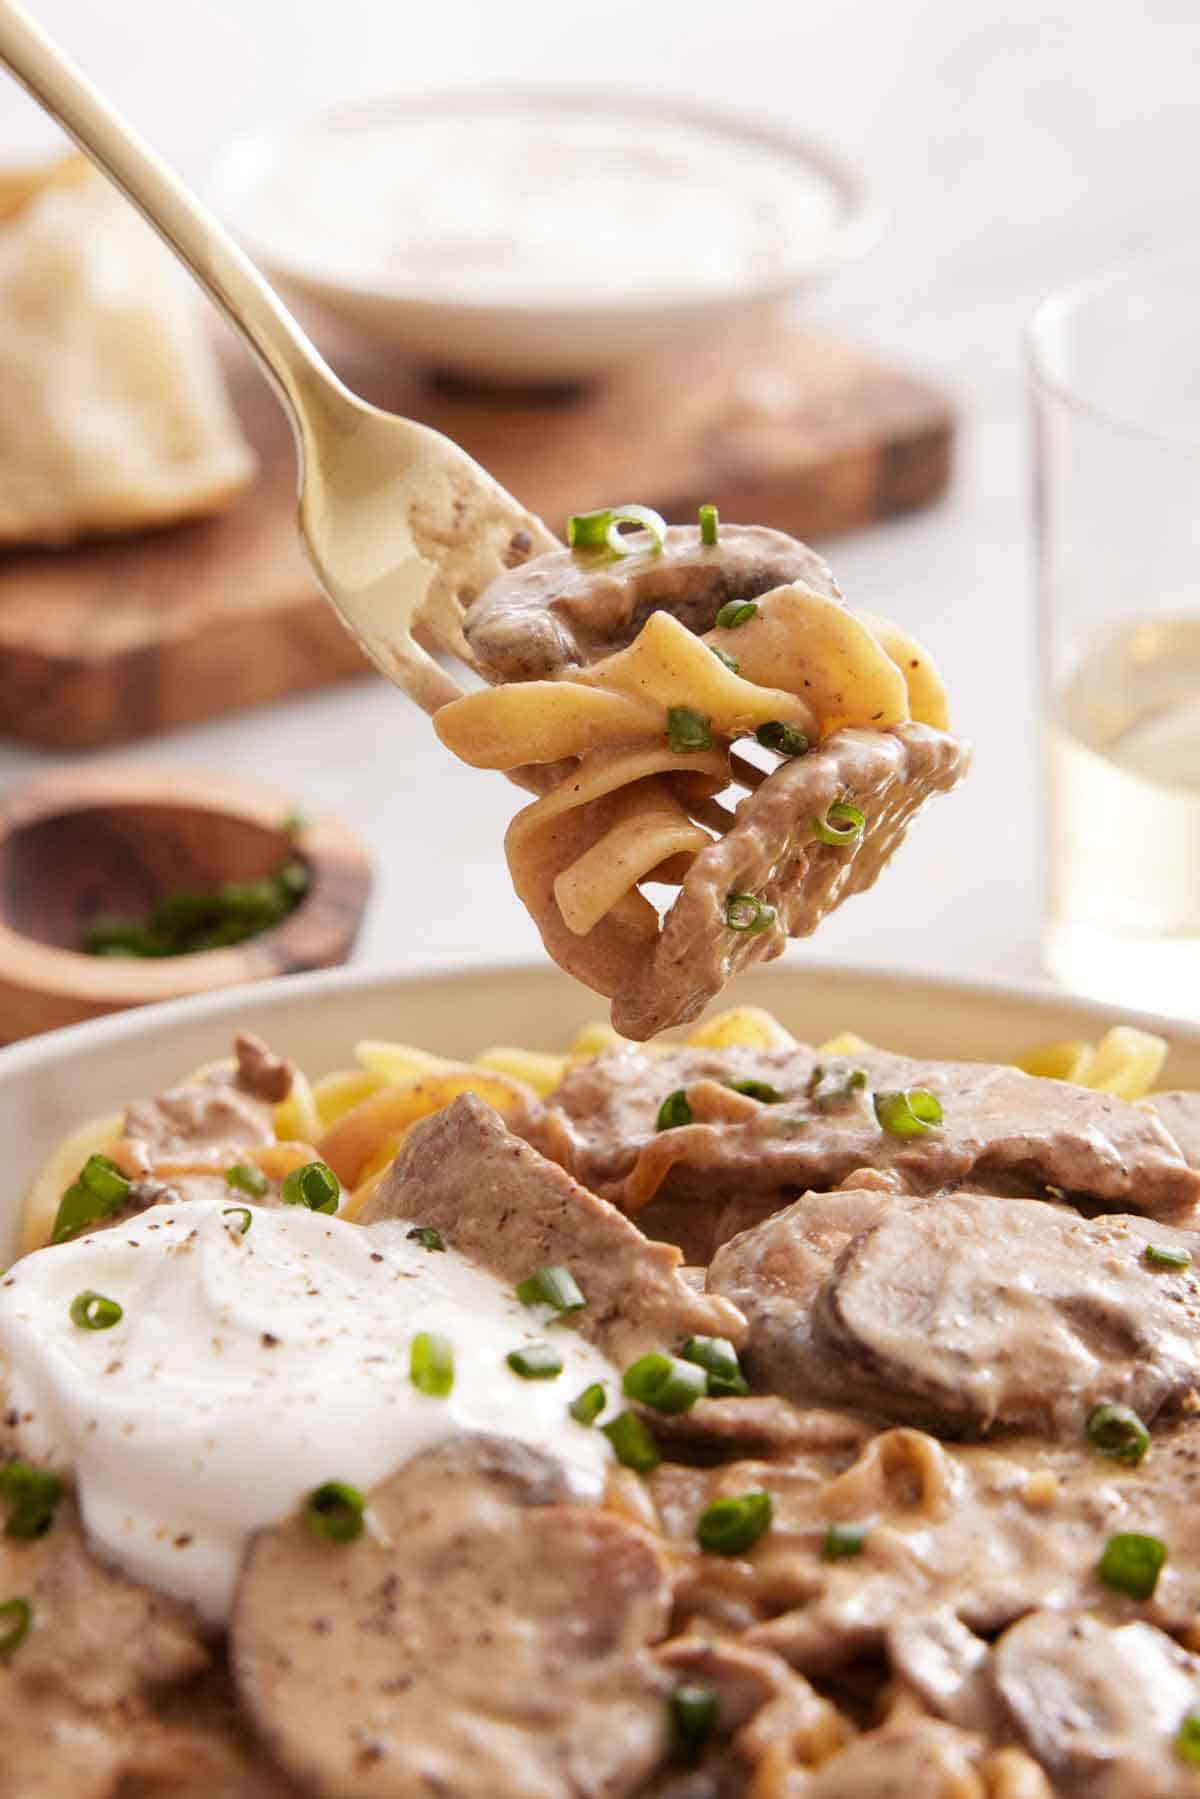 A forkful of beef stroganoff lifted from a bowl.